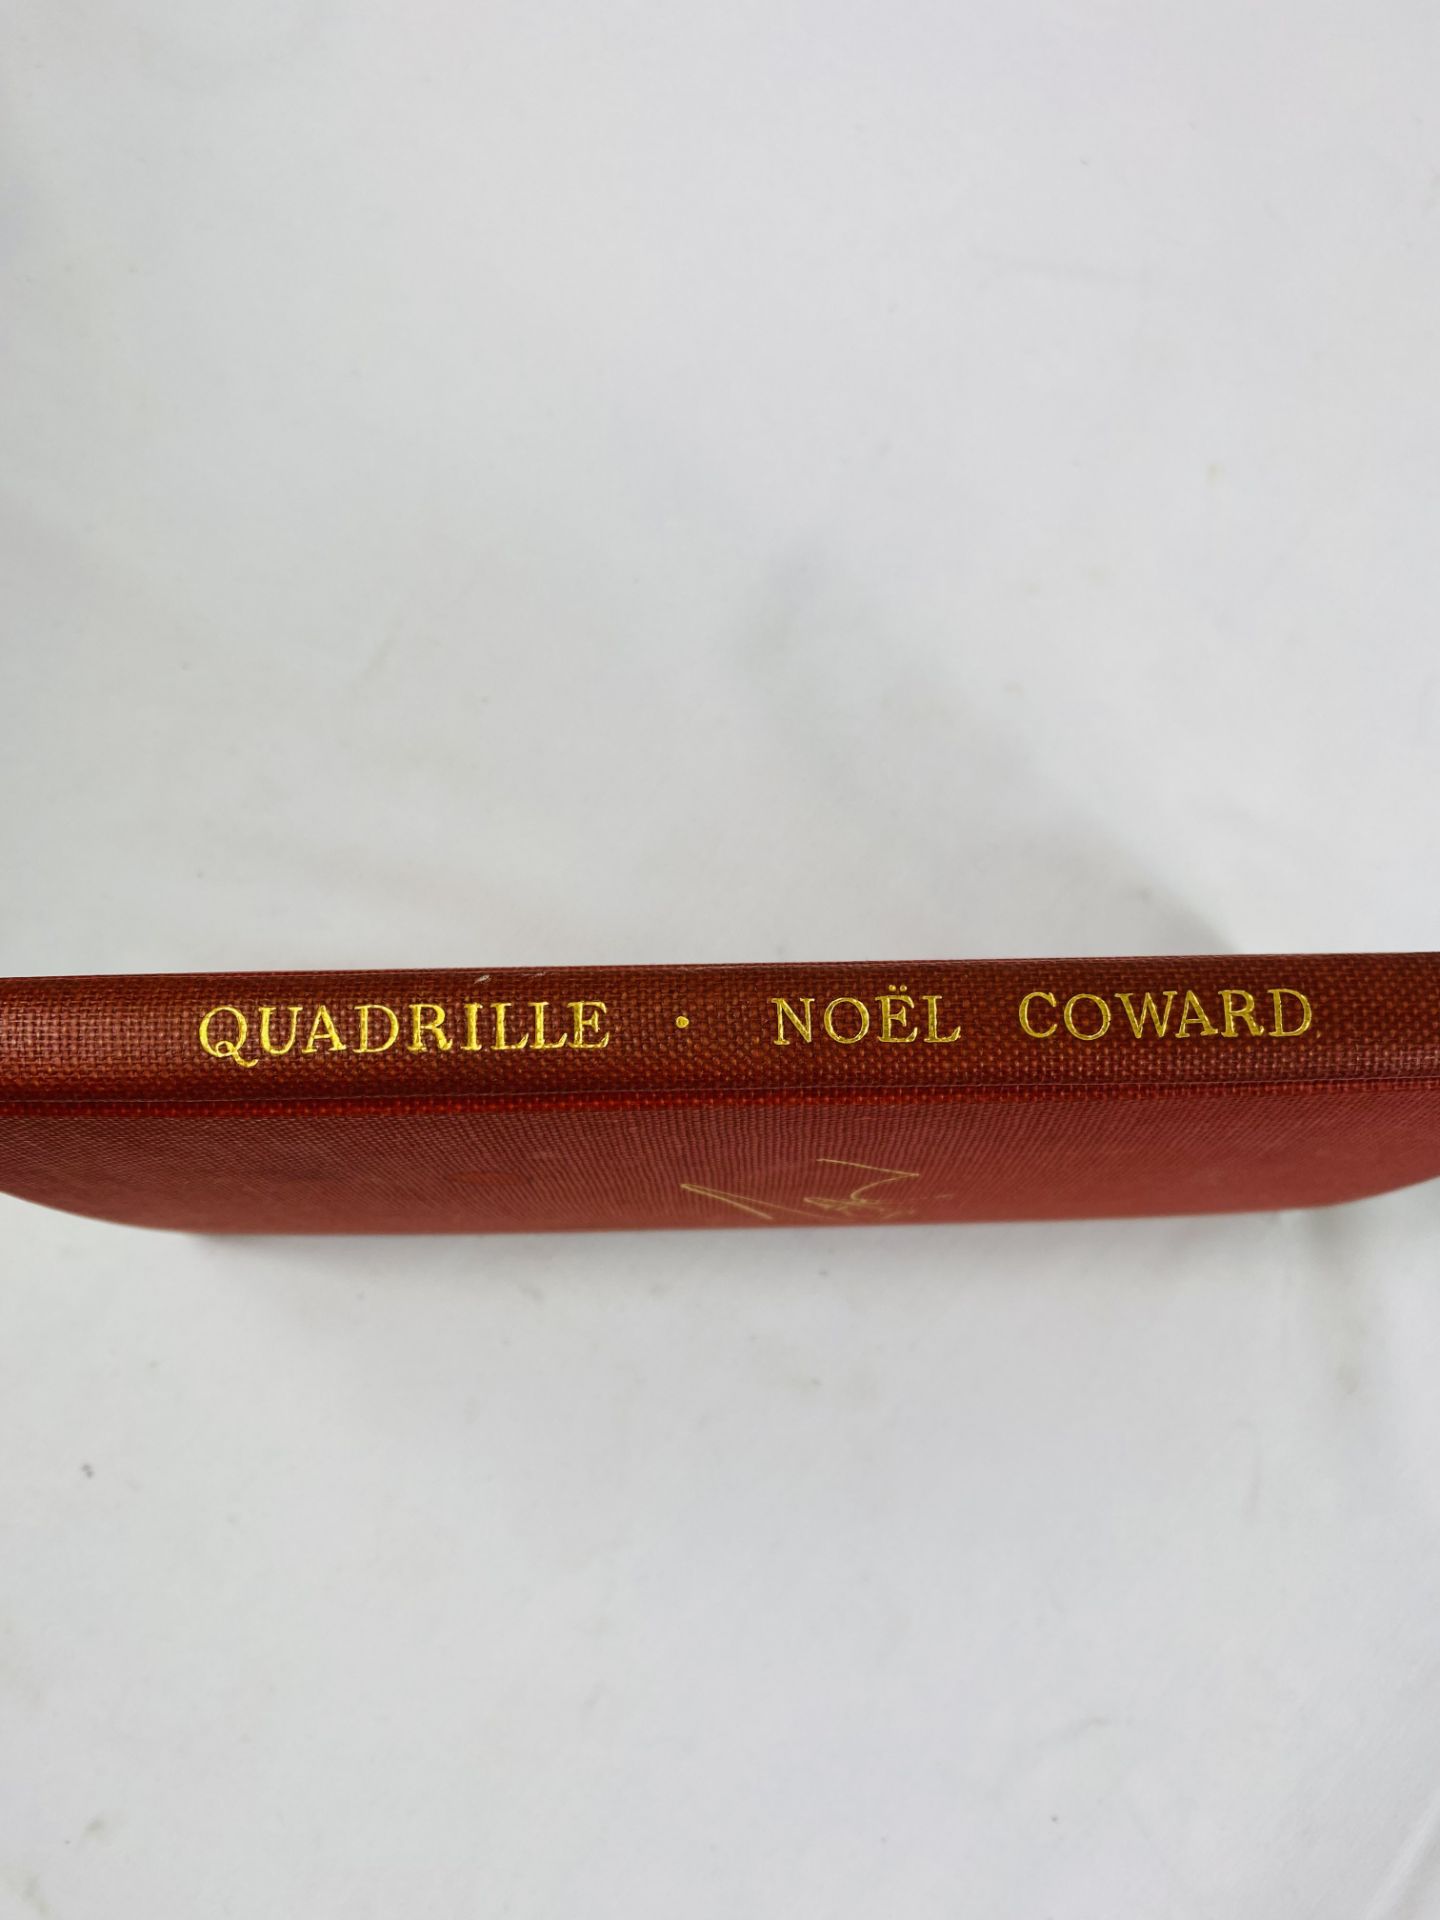 Noel Coward, Quadrille, together with two copies of The Art of Noel Coward by Robert Greacen - Image 6 of 7